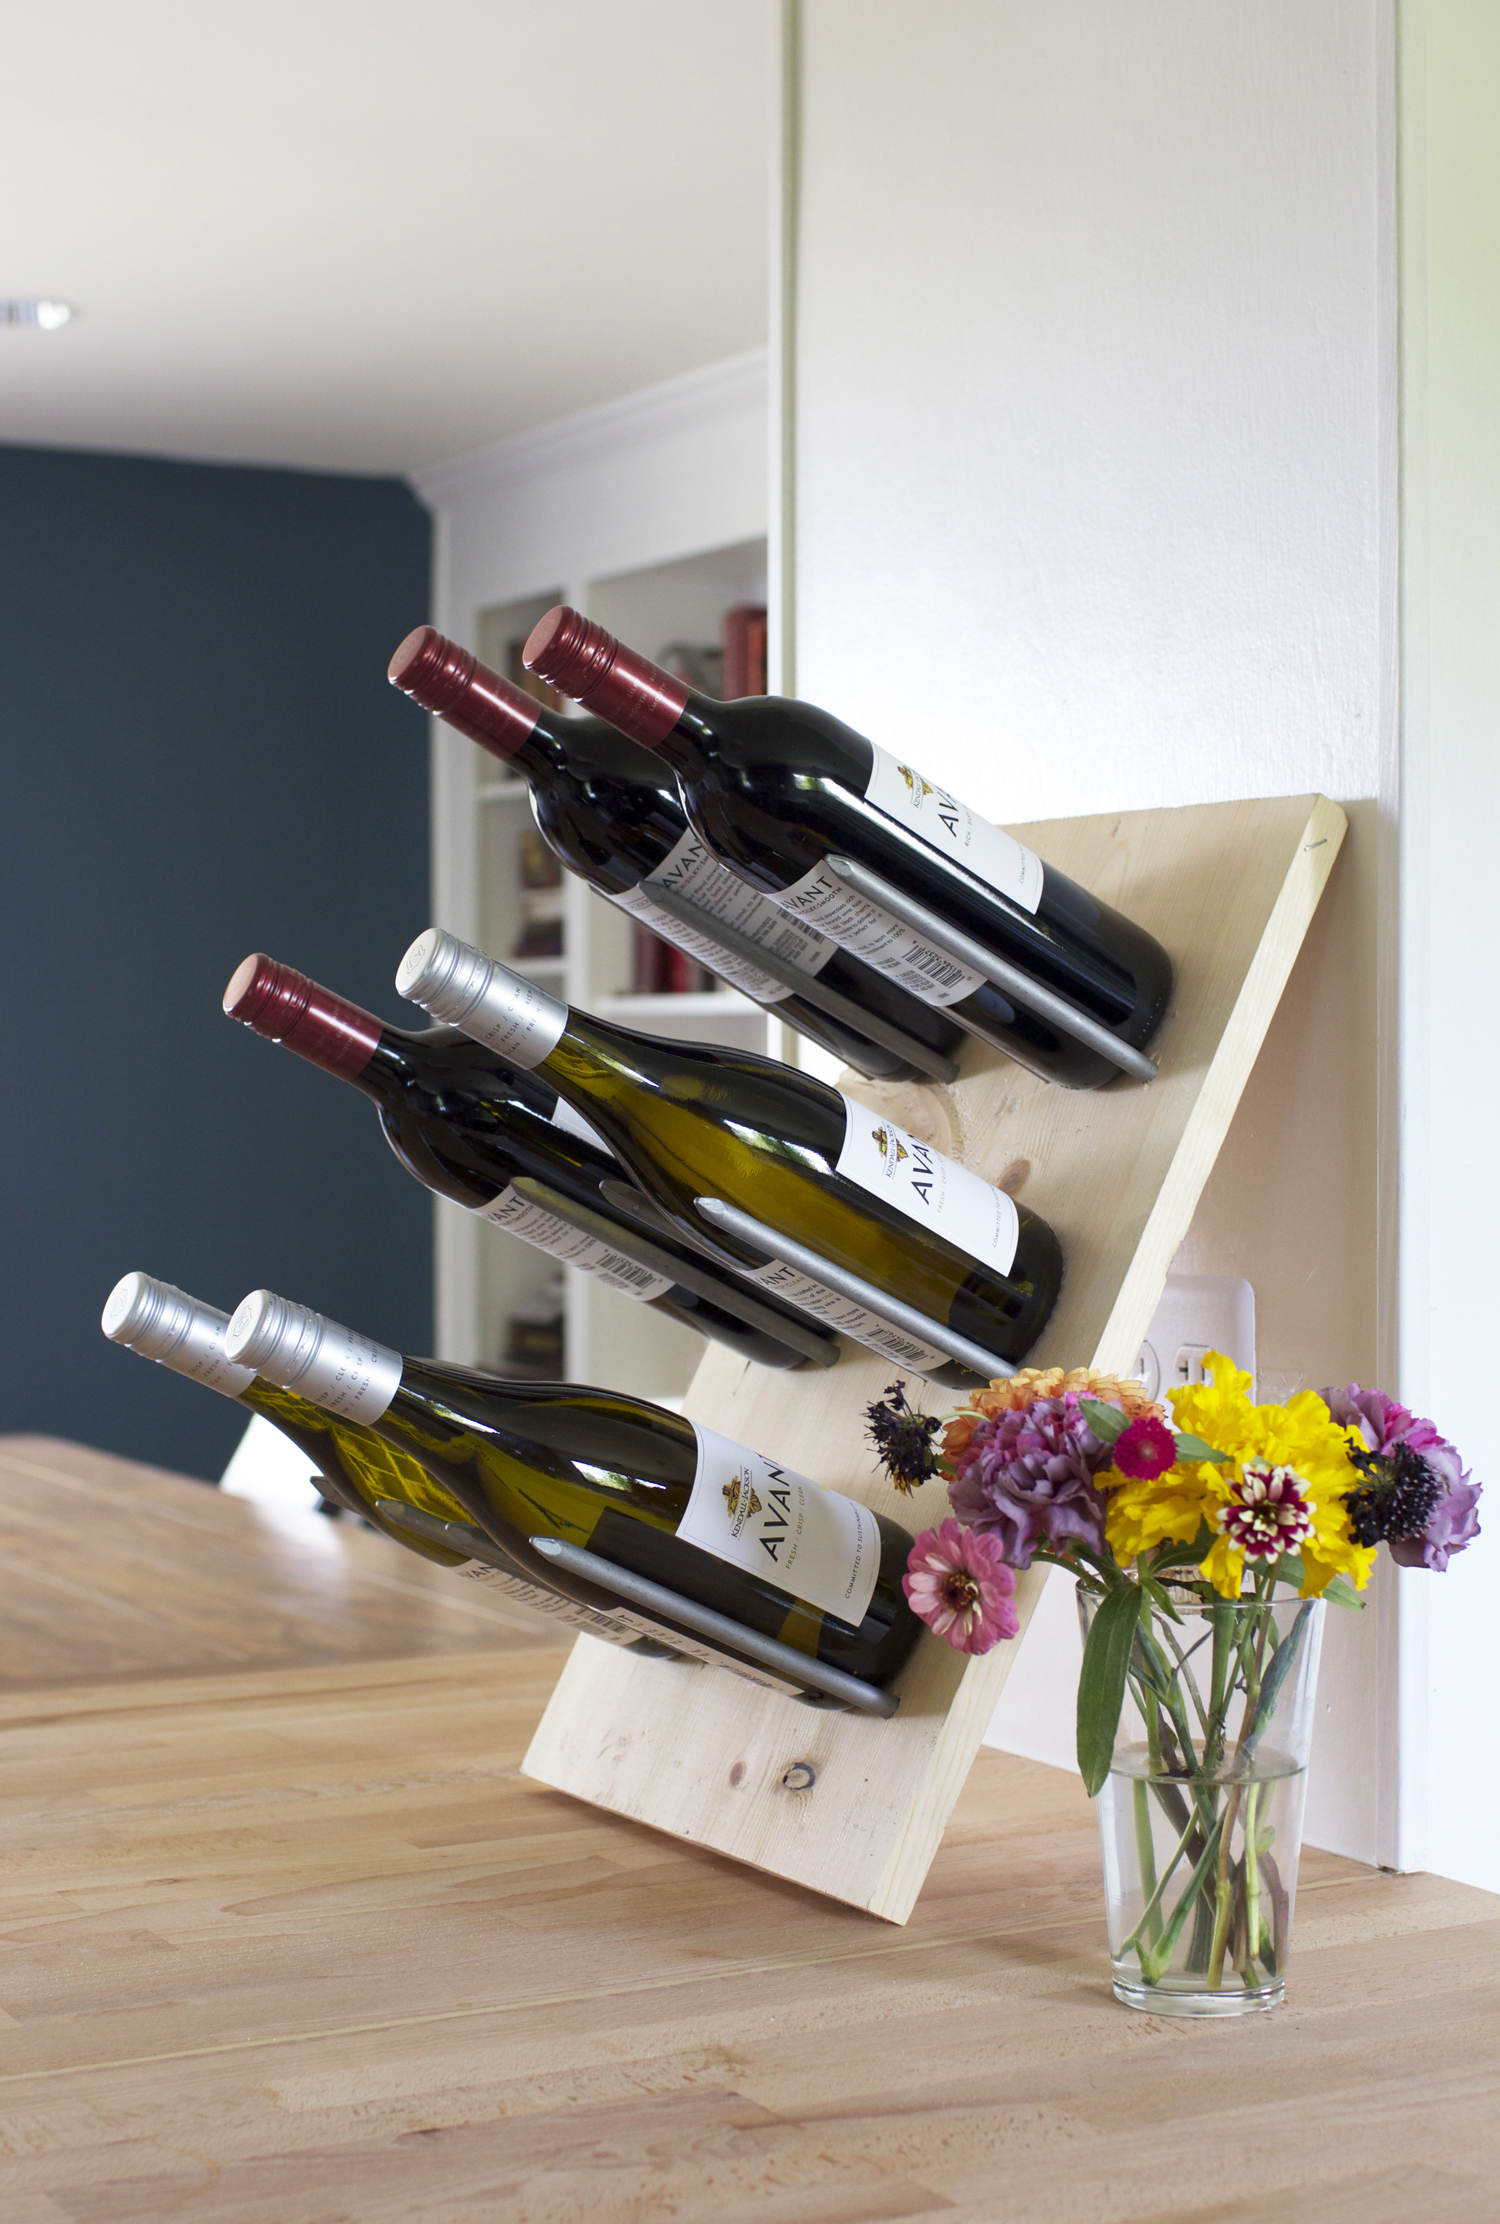 Wine bottles are definitely pretty enough to be displayed, and this way it’ll be easy to keep track of what wine you have on hand! #DIY #KJAVANT